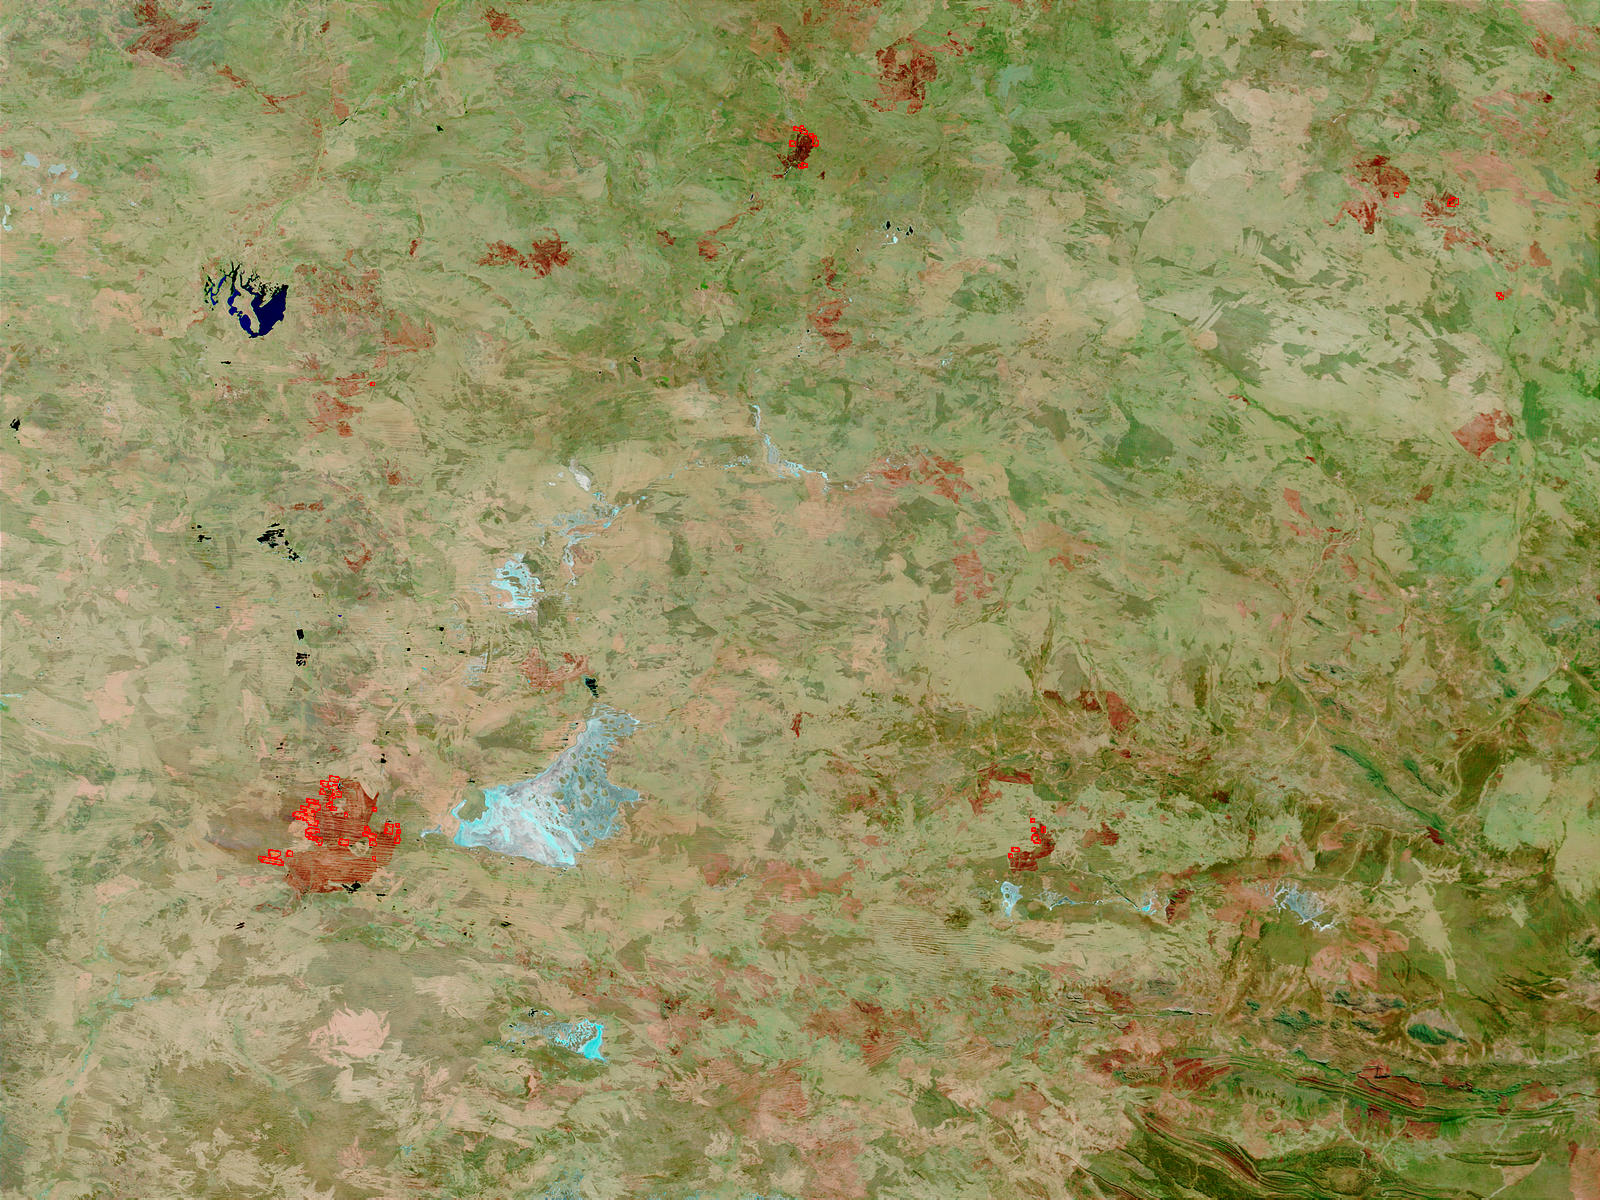 Fires and burn scars near Alice Springs, Central Australia - related image preview